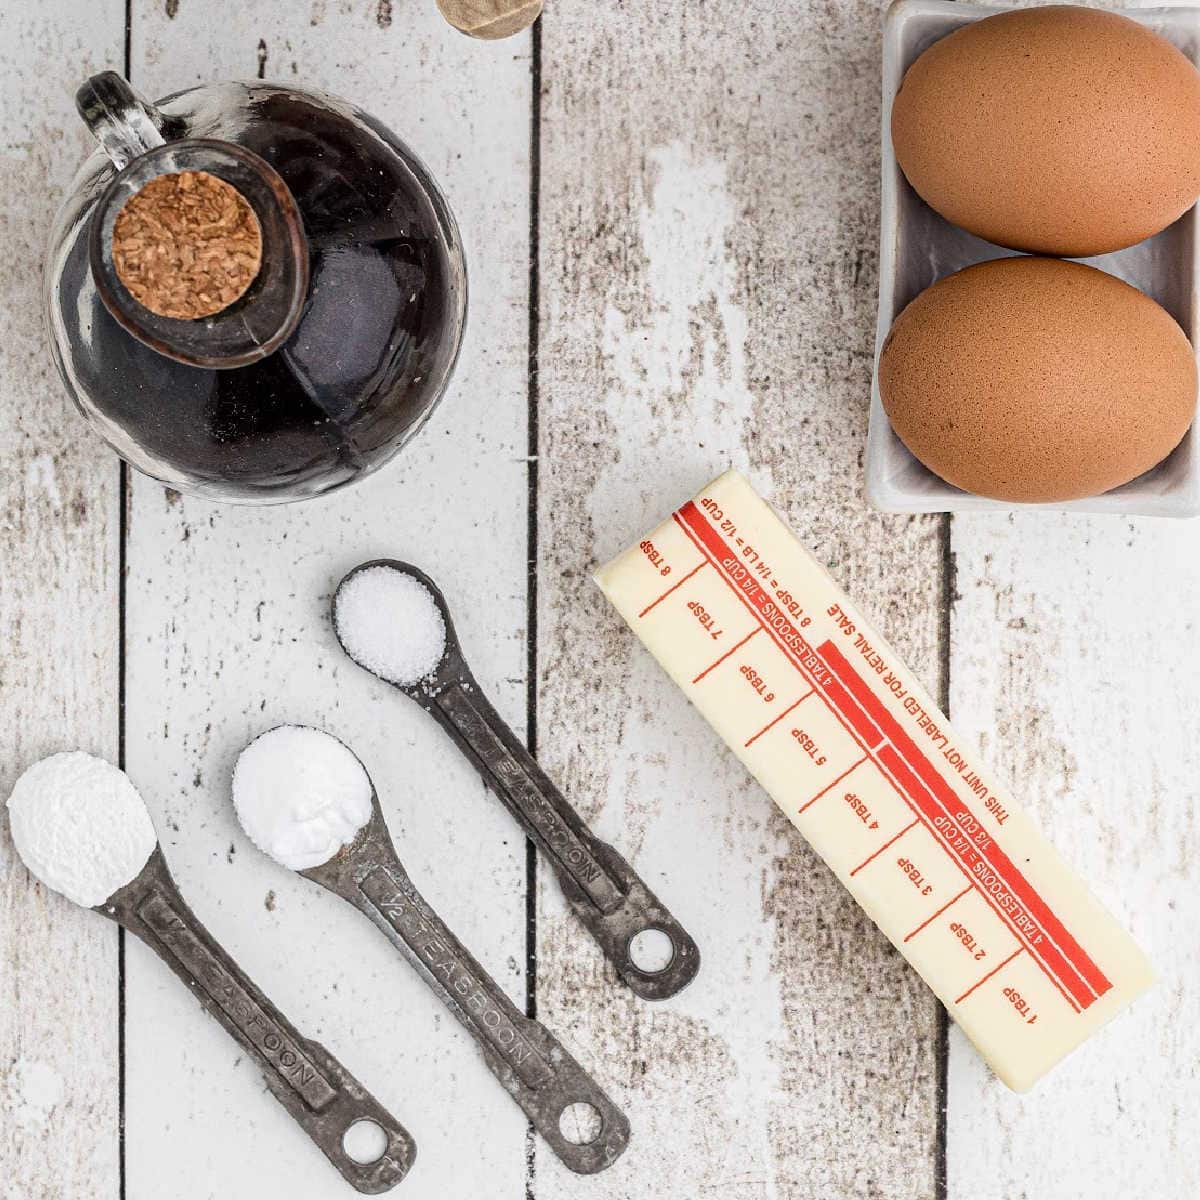 How to Measure Ingredients for Better Baking